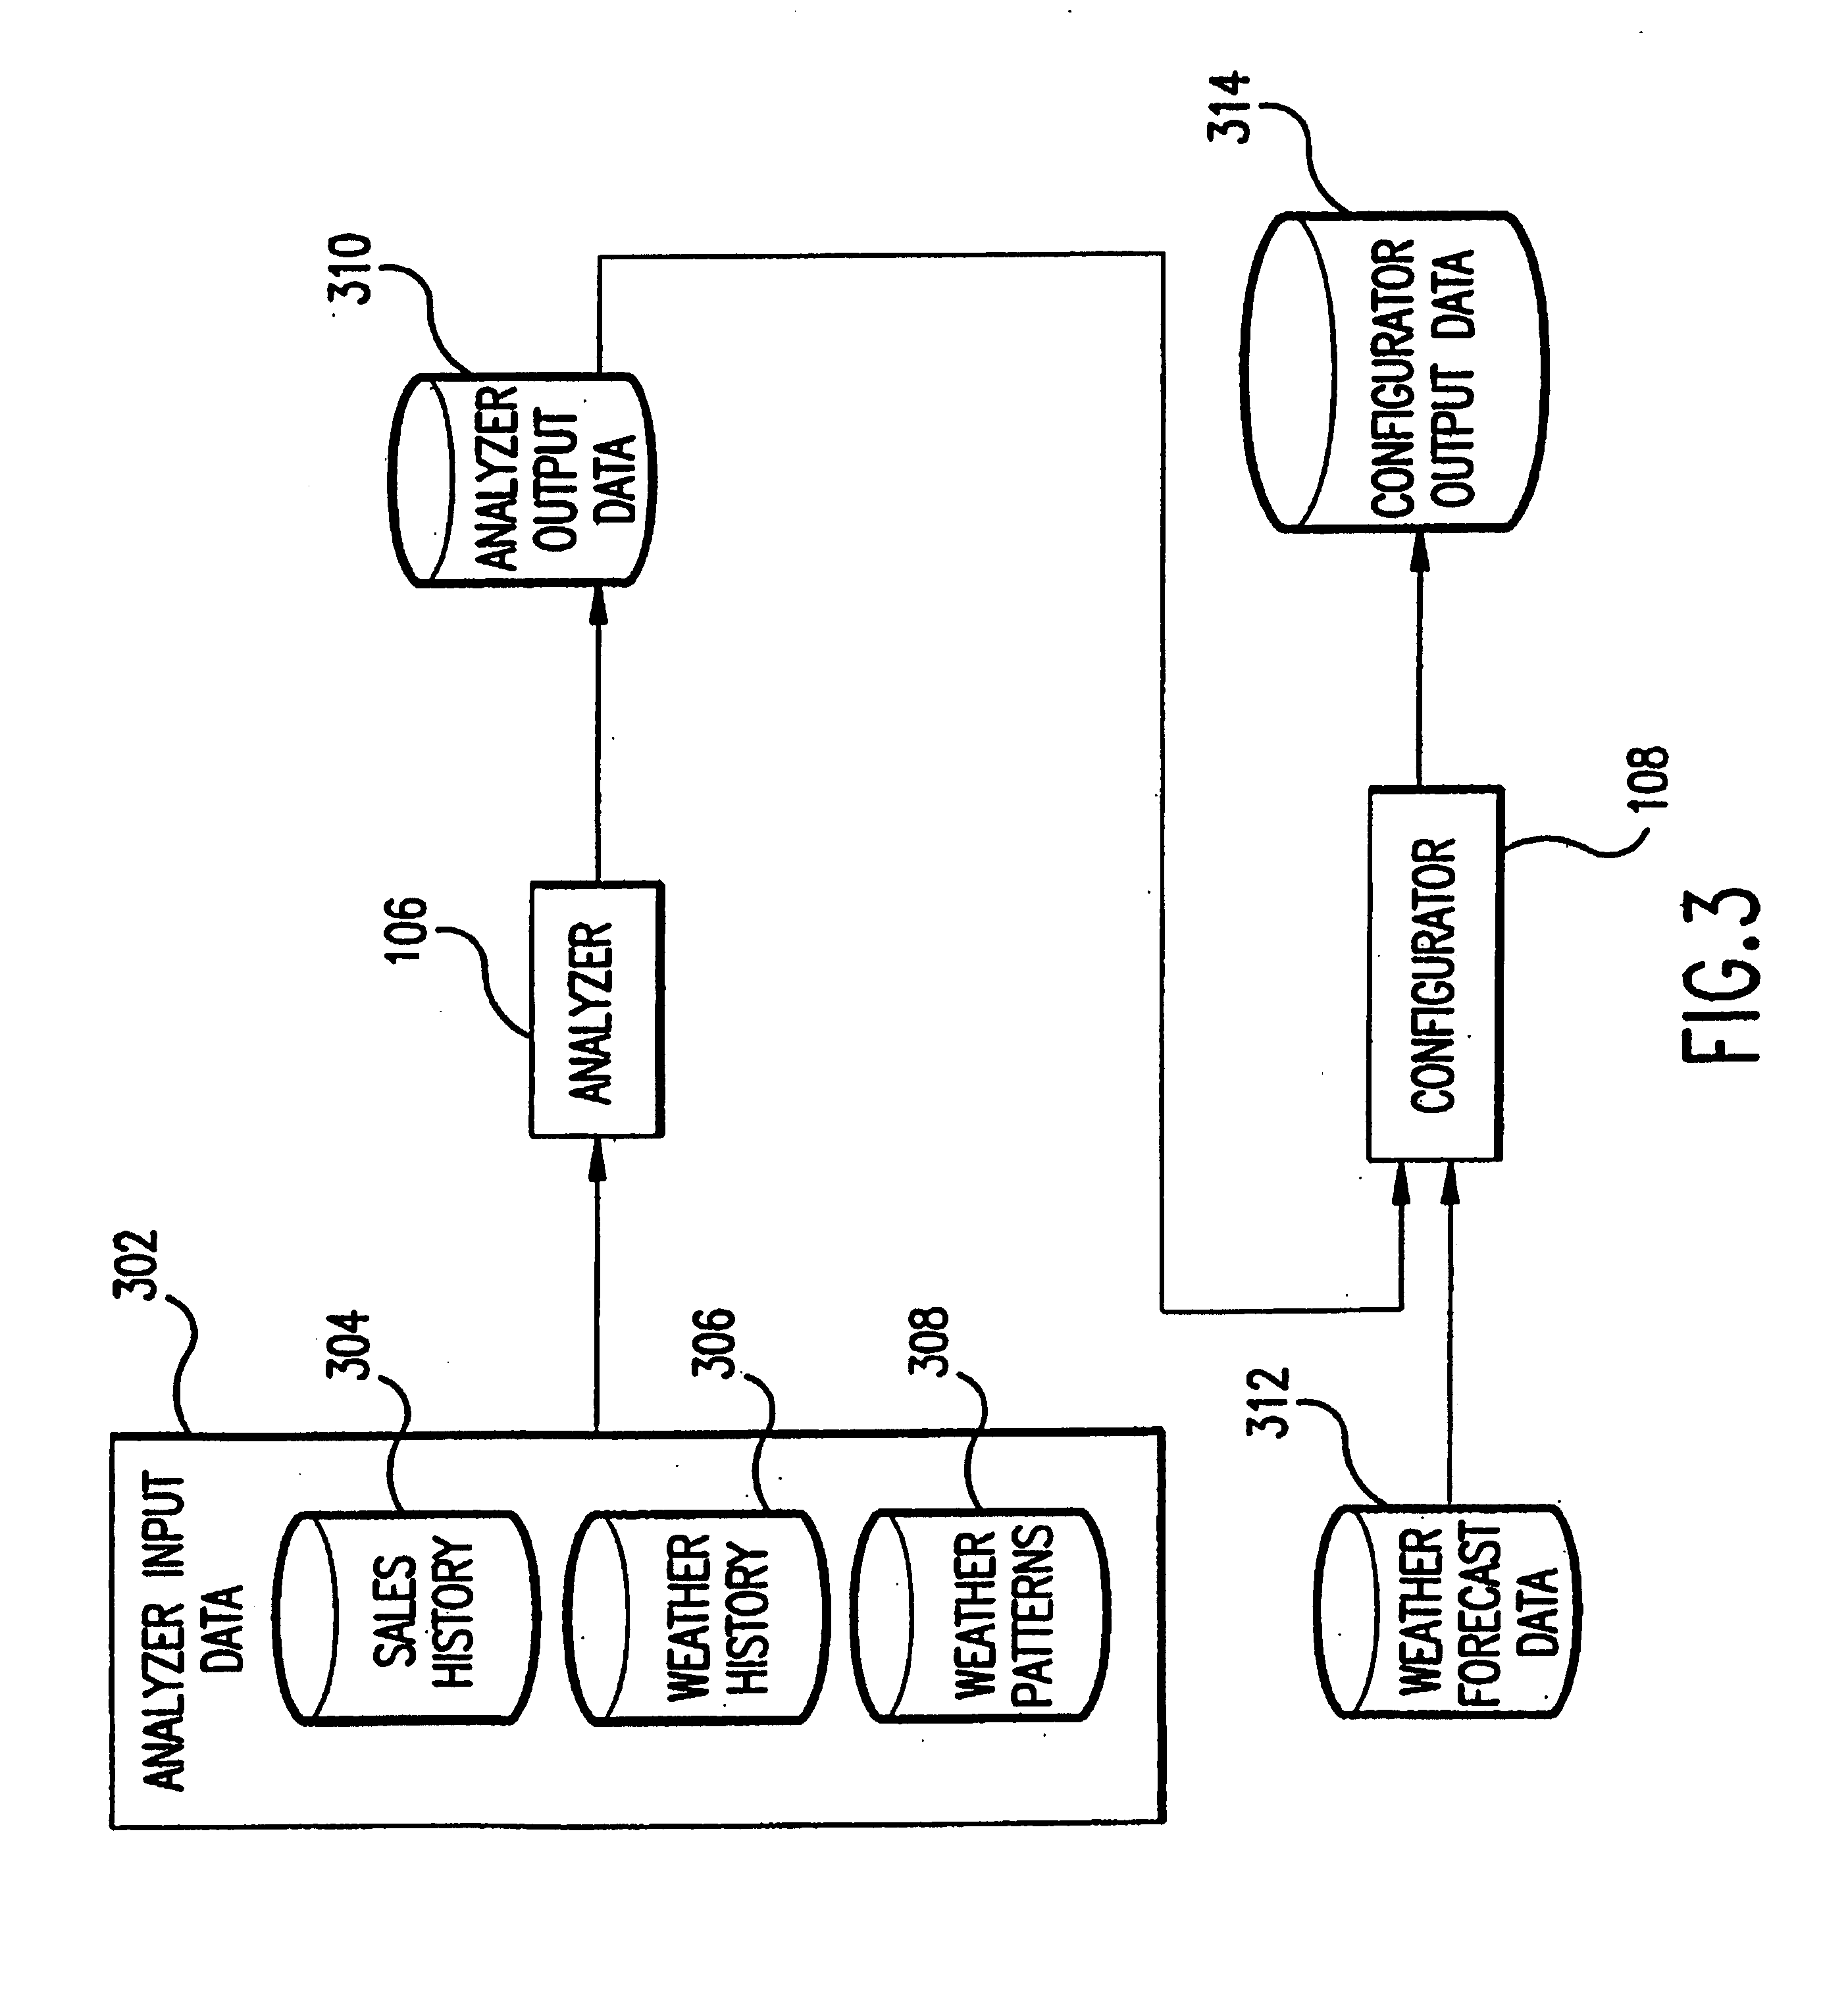 System and method for weather adapted, business performance forecasting